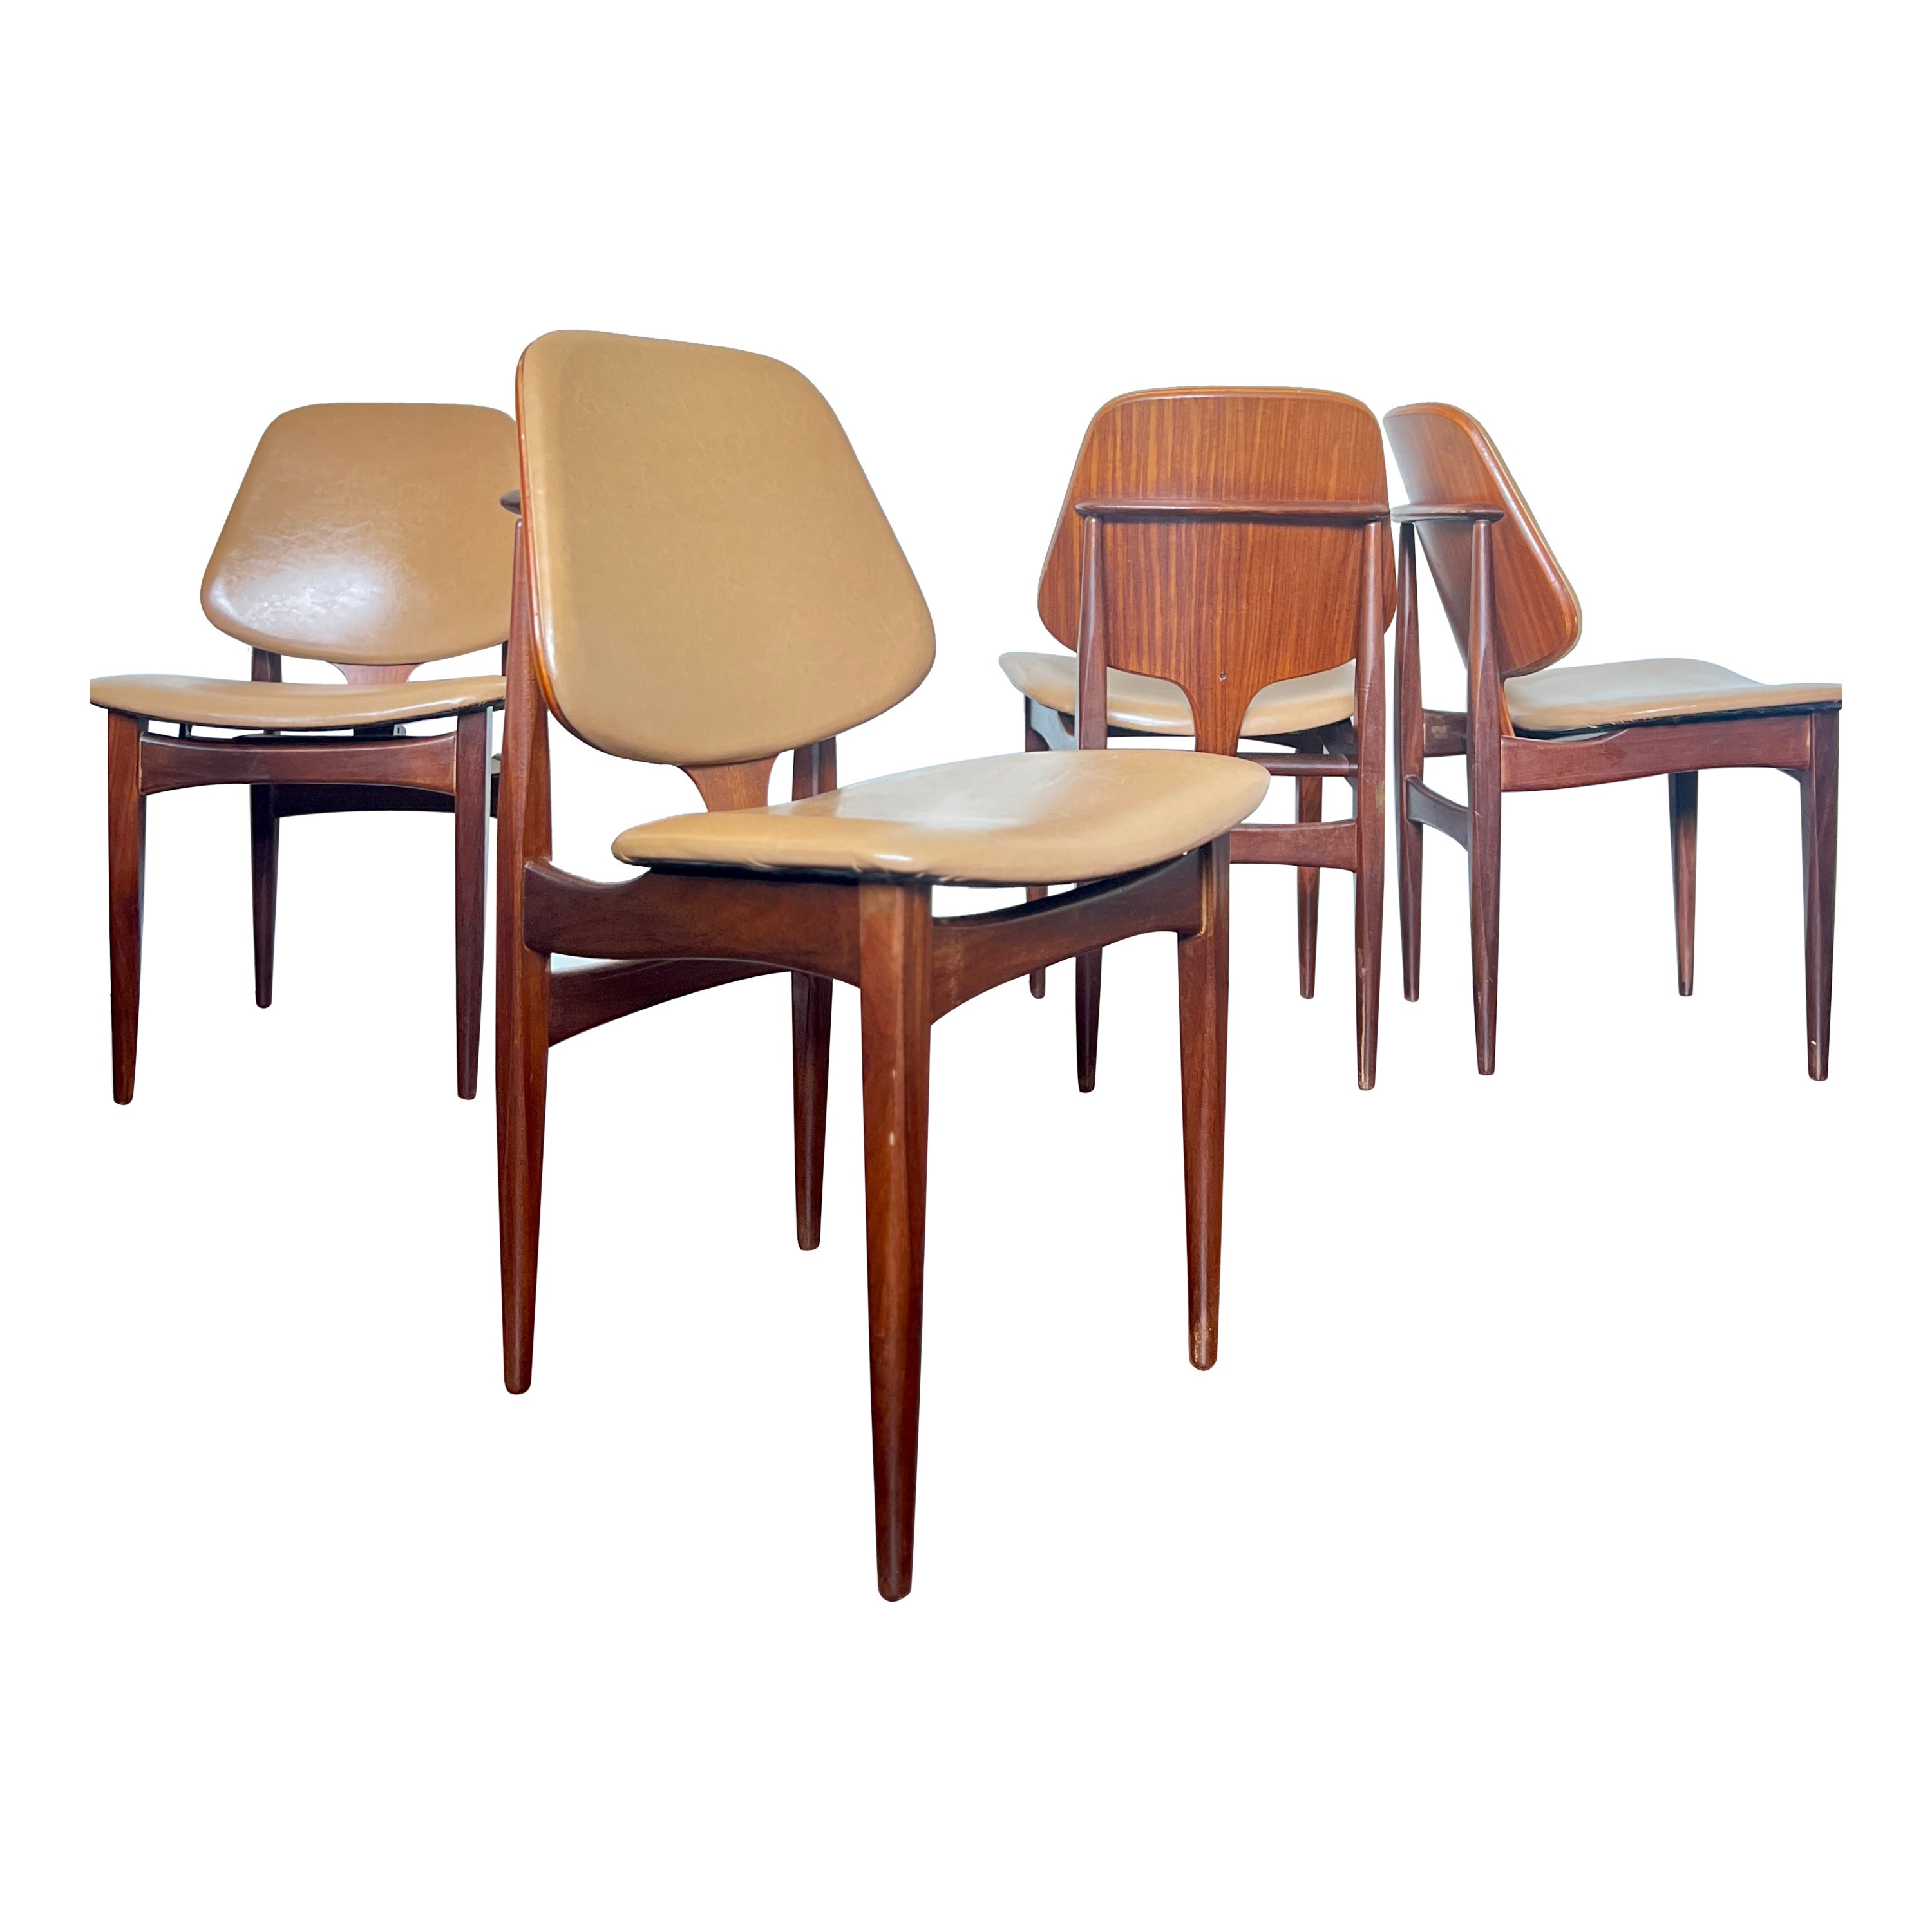 A set of 4 mid century modern dining chairs by Elliots of Newbury